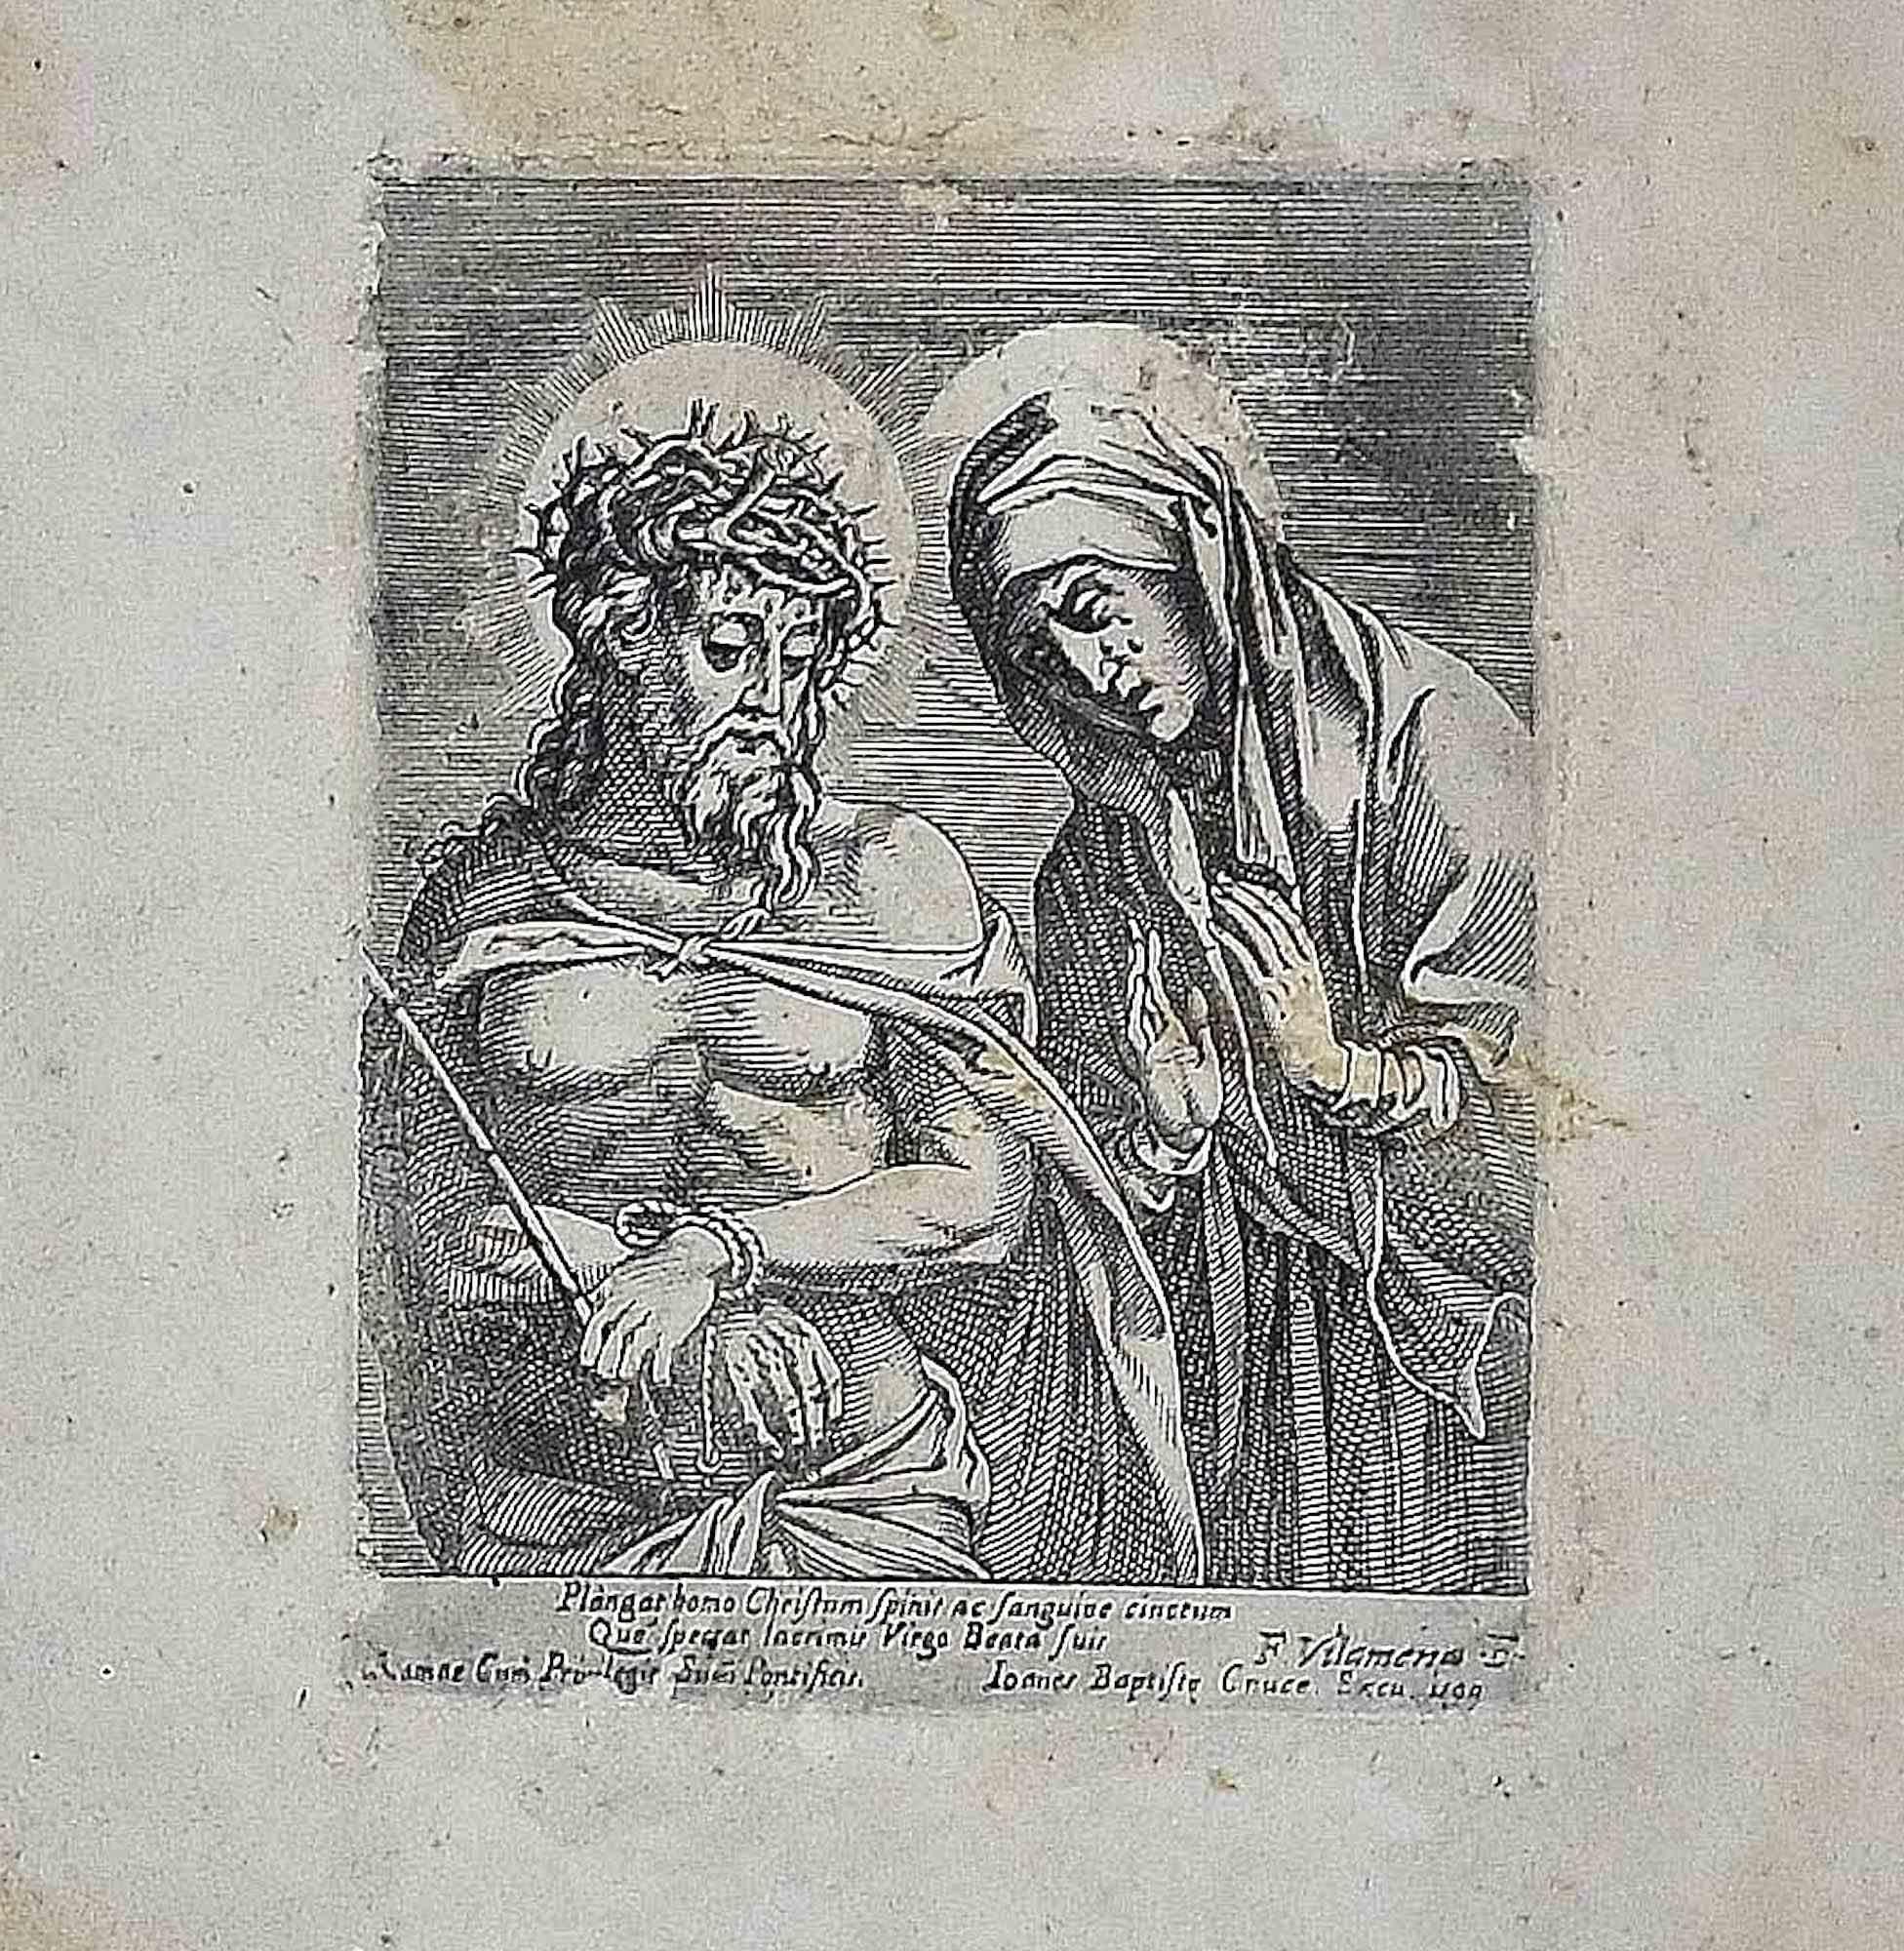 Jesus and Virgin Mary - Etching - Second half of 18th Century